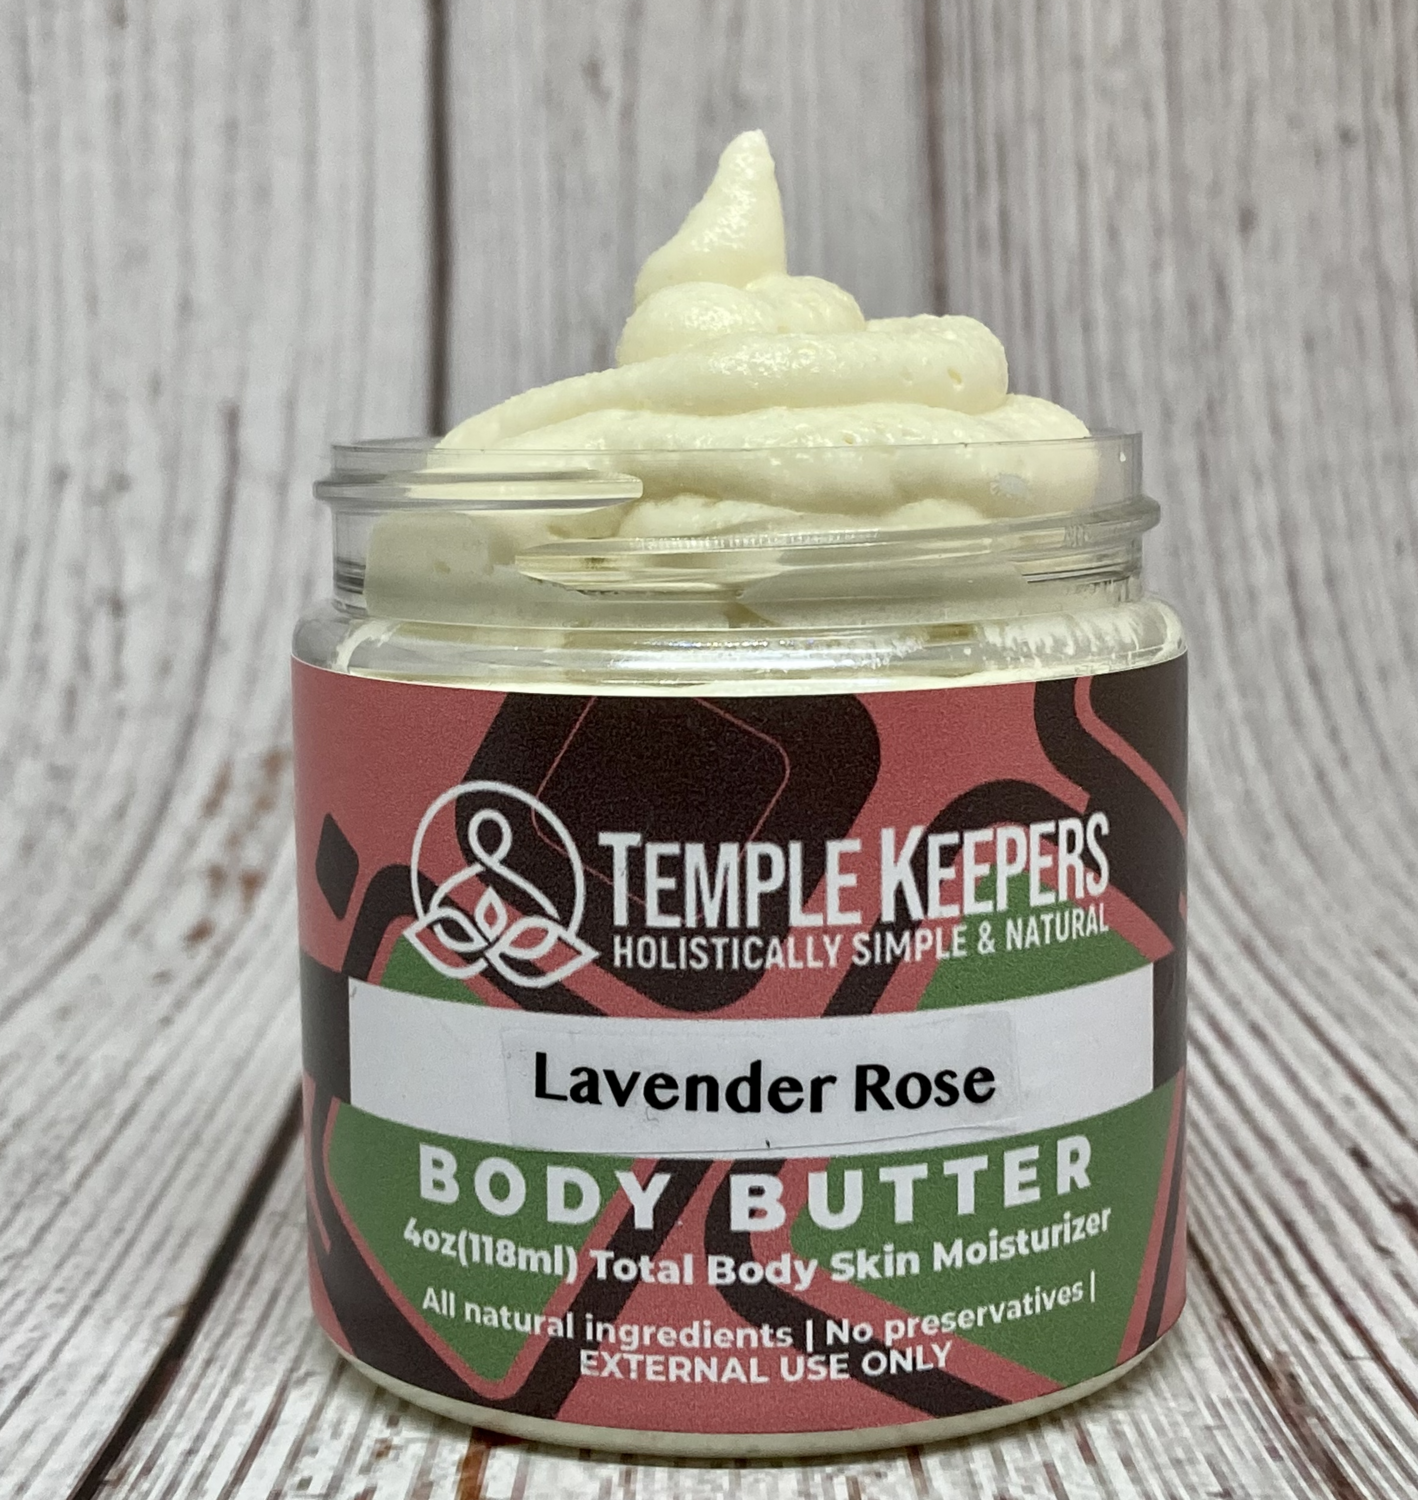 Whipped Body Butter - 4 oz.